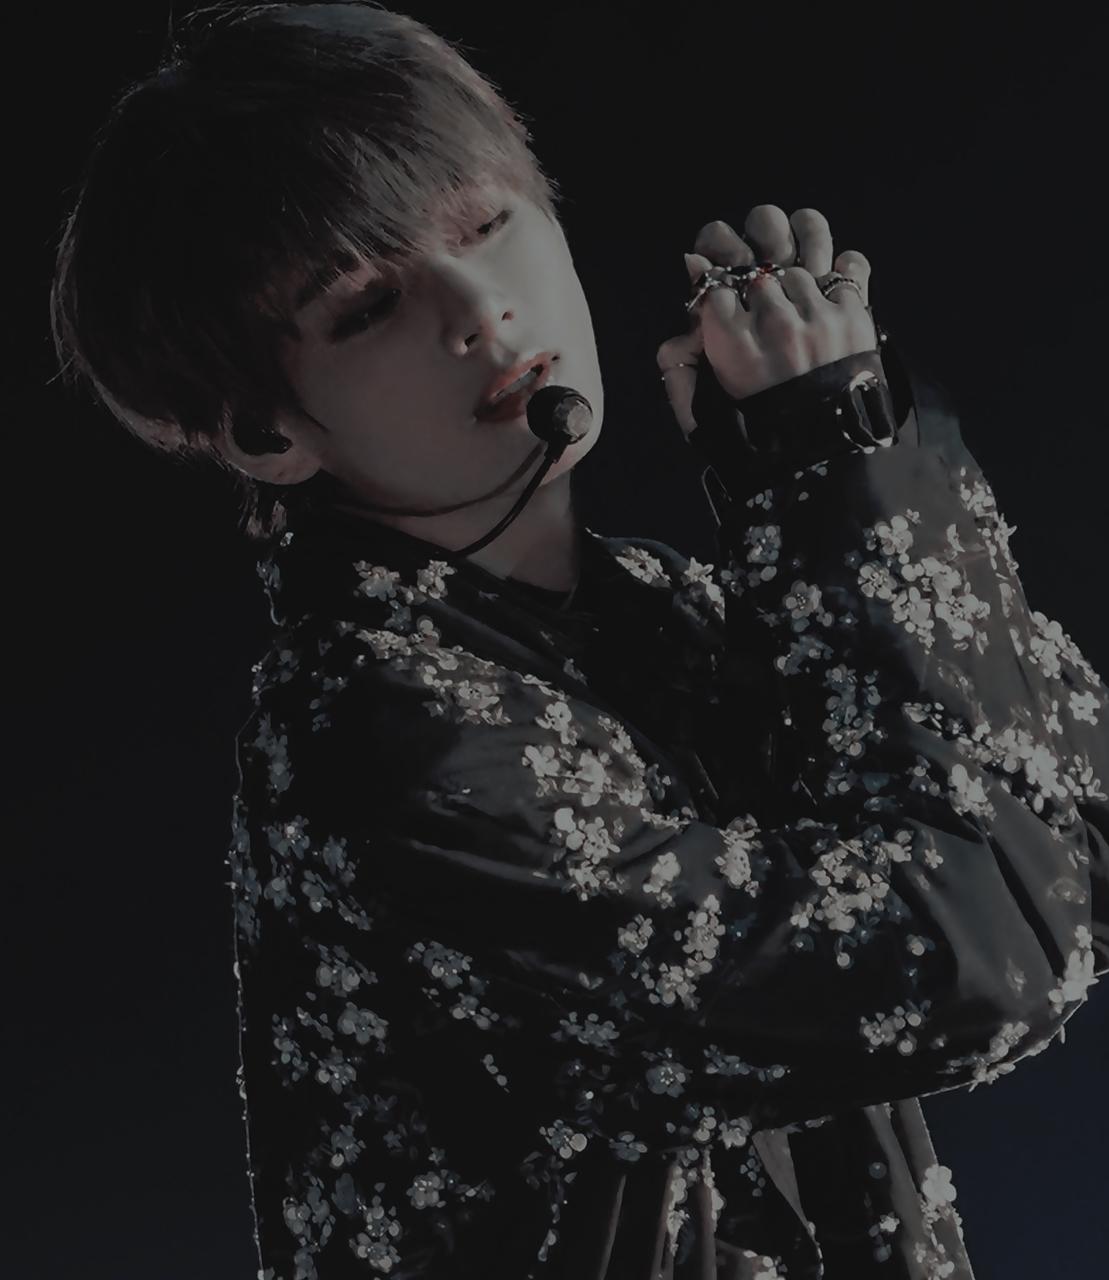 image about dark x taehyung. See more